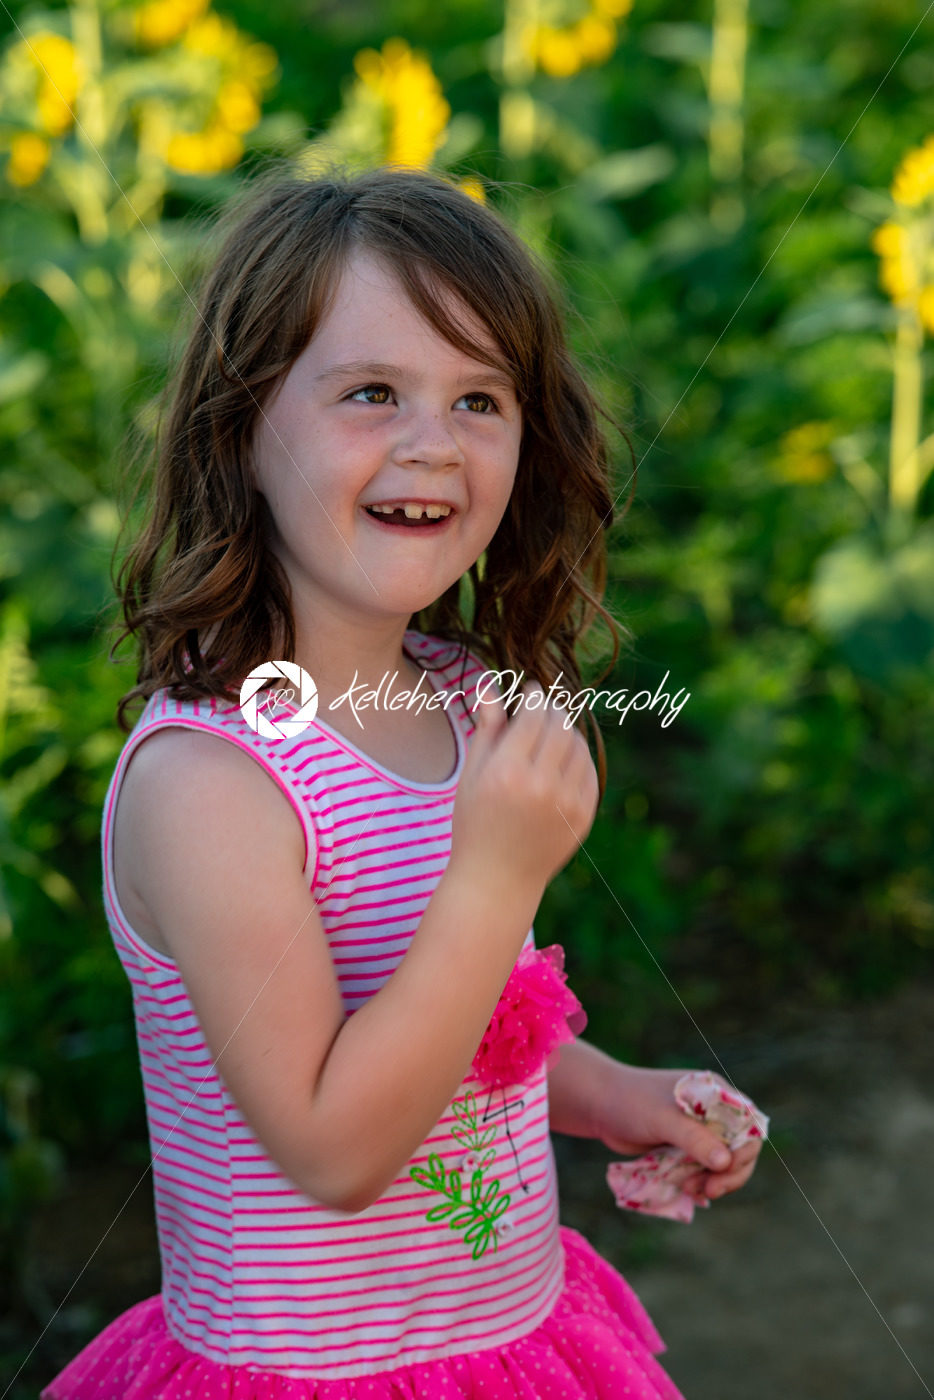 Beauty joyful young girl with sunflower enjoying nature and laughing on summer sunflower field. Sunflare, sunbeams, glow sun. Backlit. - Kelleher Photography Store